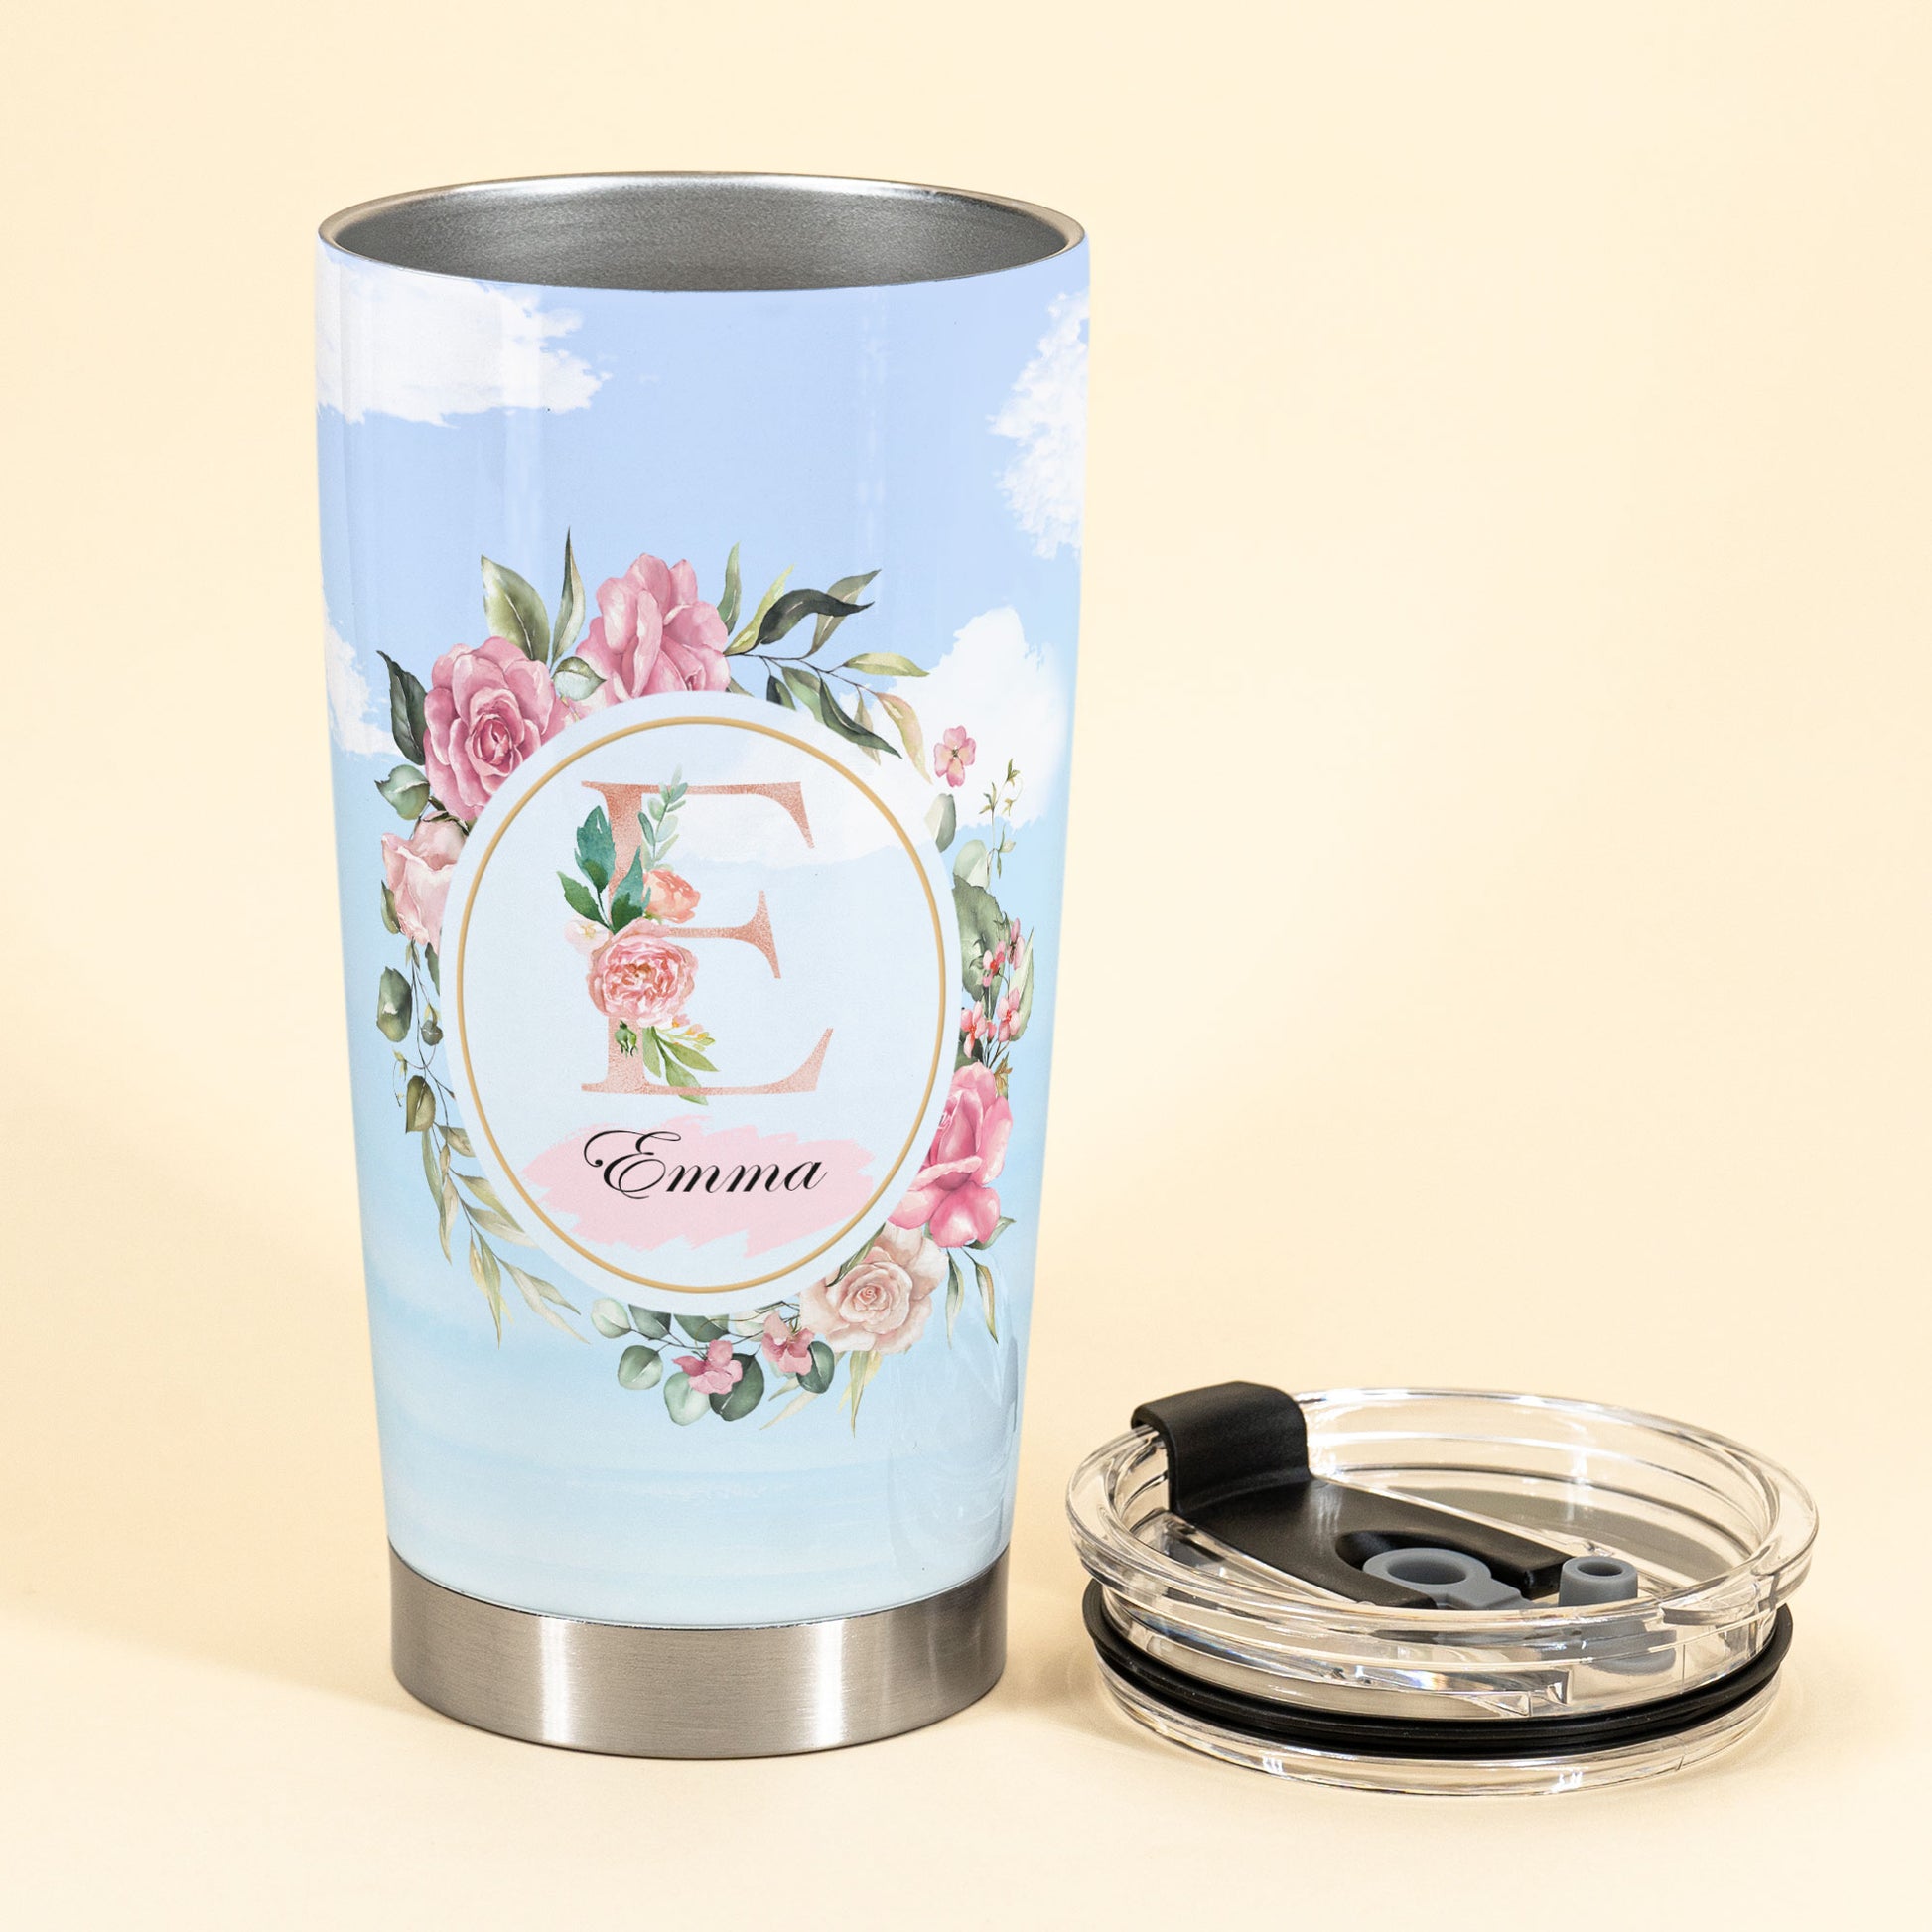 Catch Flights Not Feelings - Personalized Monogram Tumbler Cup - Birthday Gift For Girls, Traveling Lovers